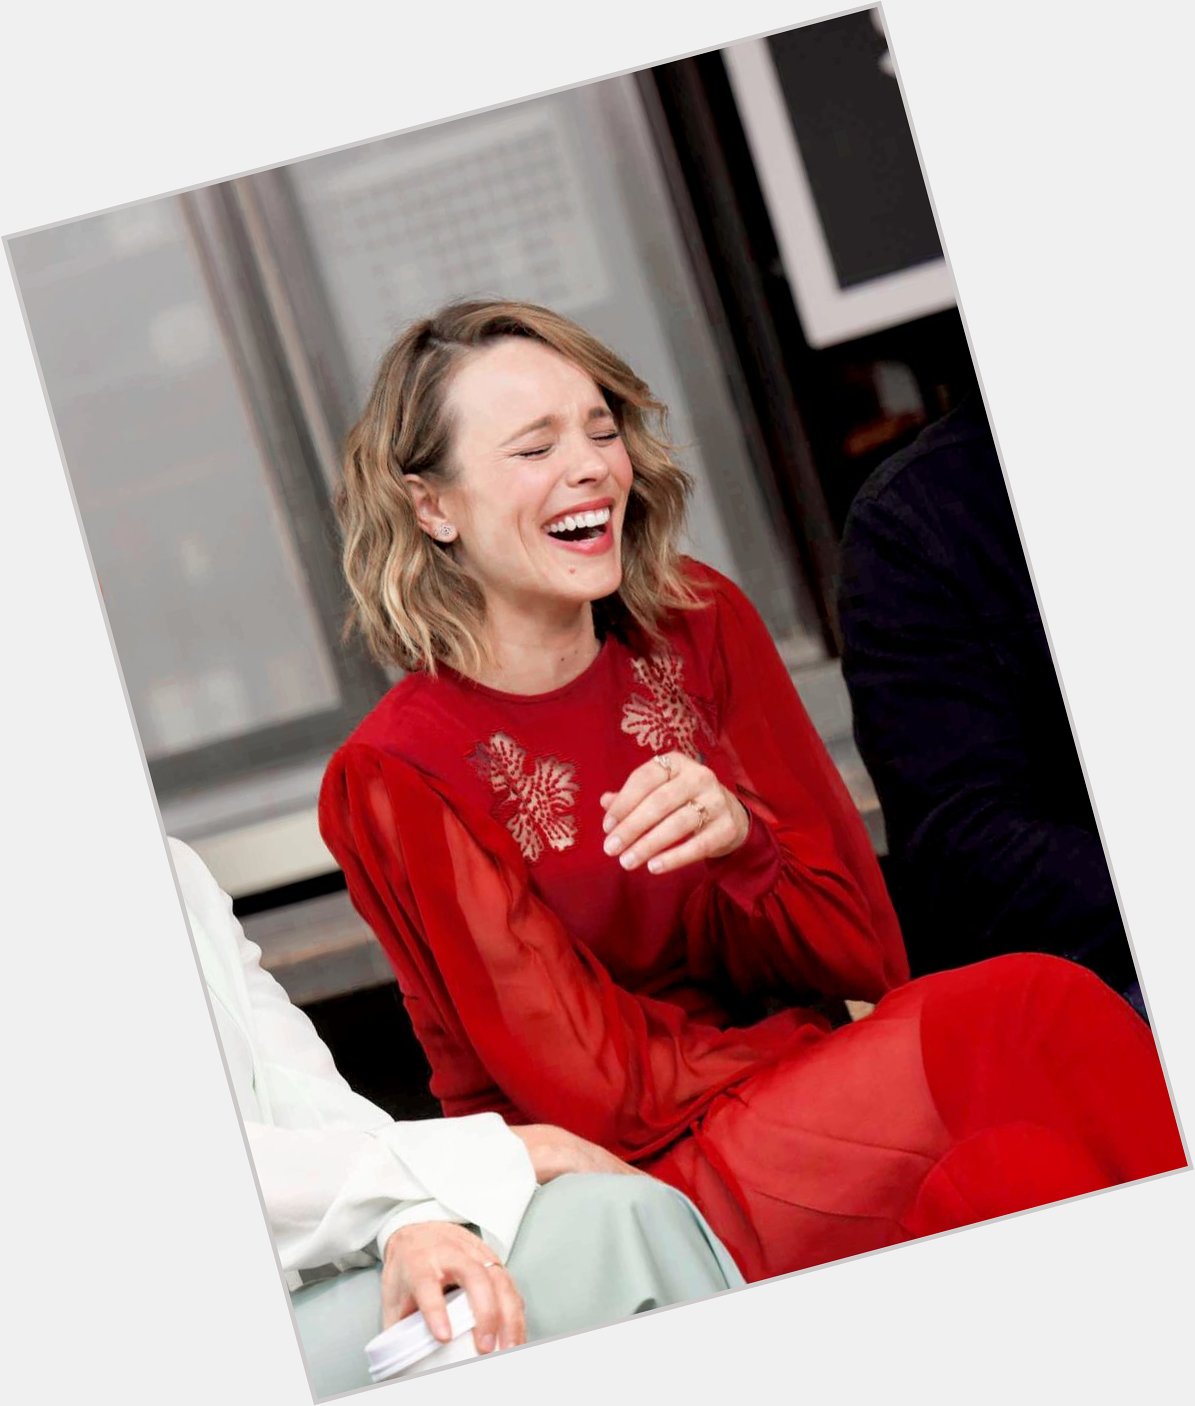 Happy birthday to the light of my life, rachel mcadams. she means everything to me, more than words could ever say. 